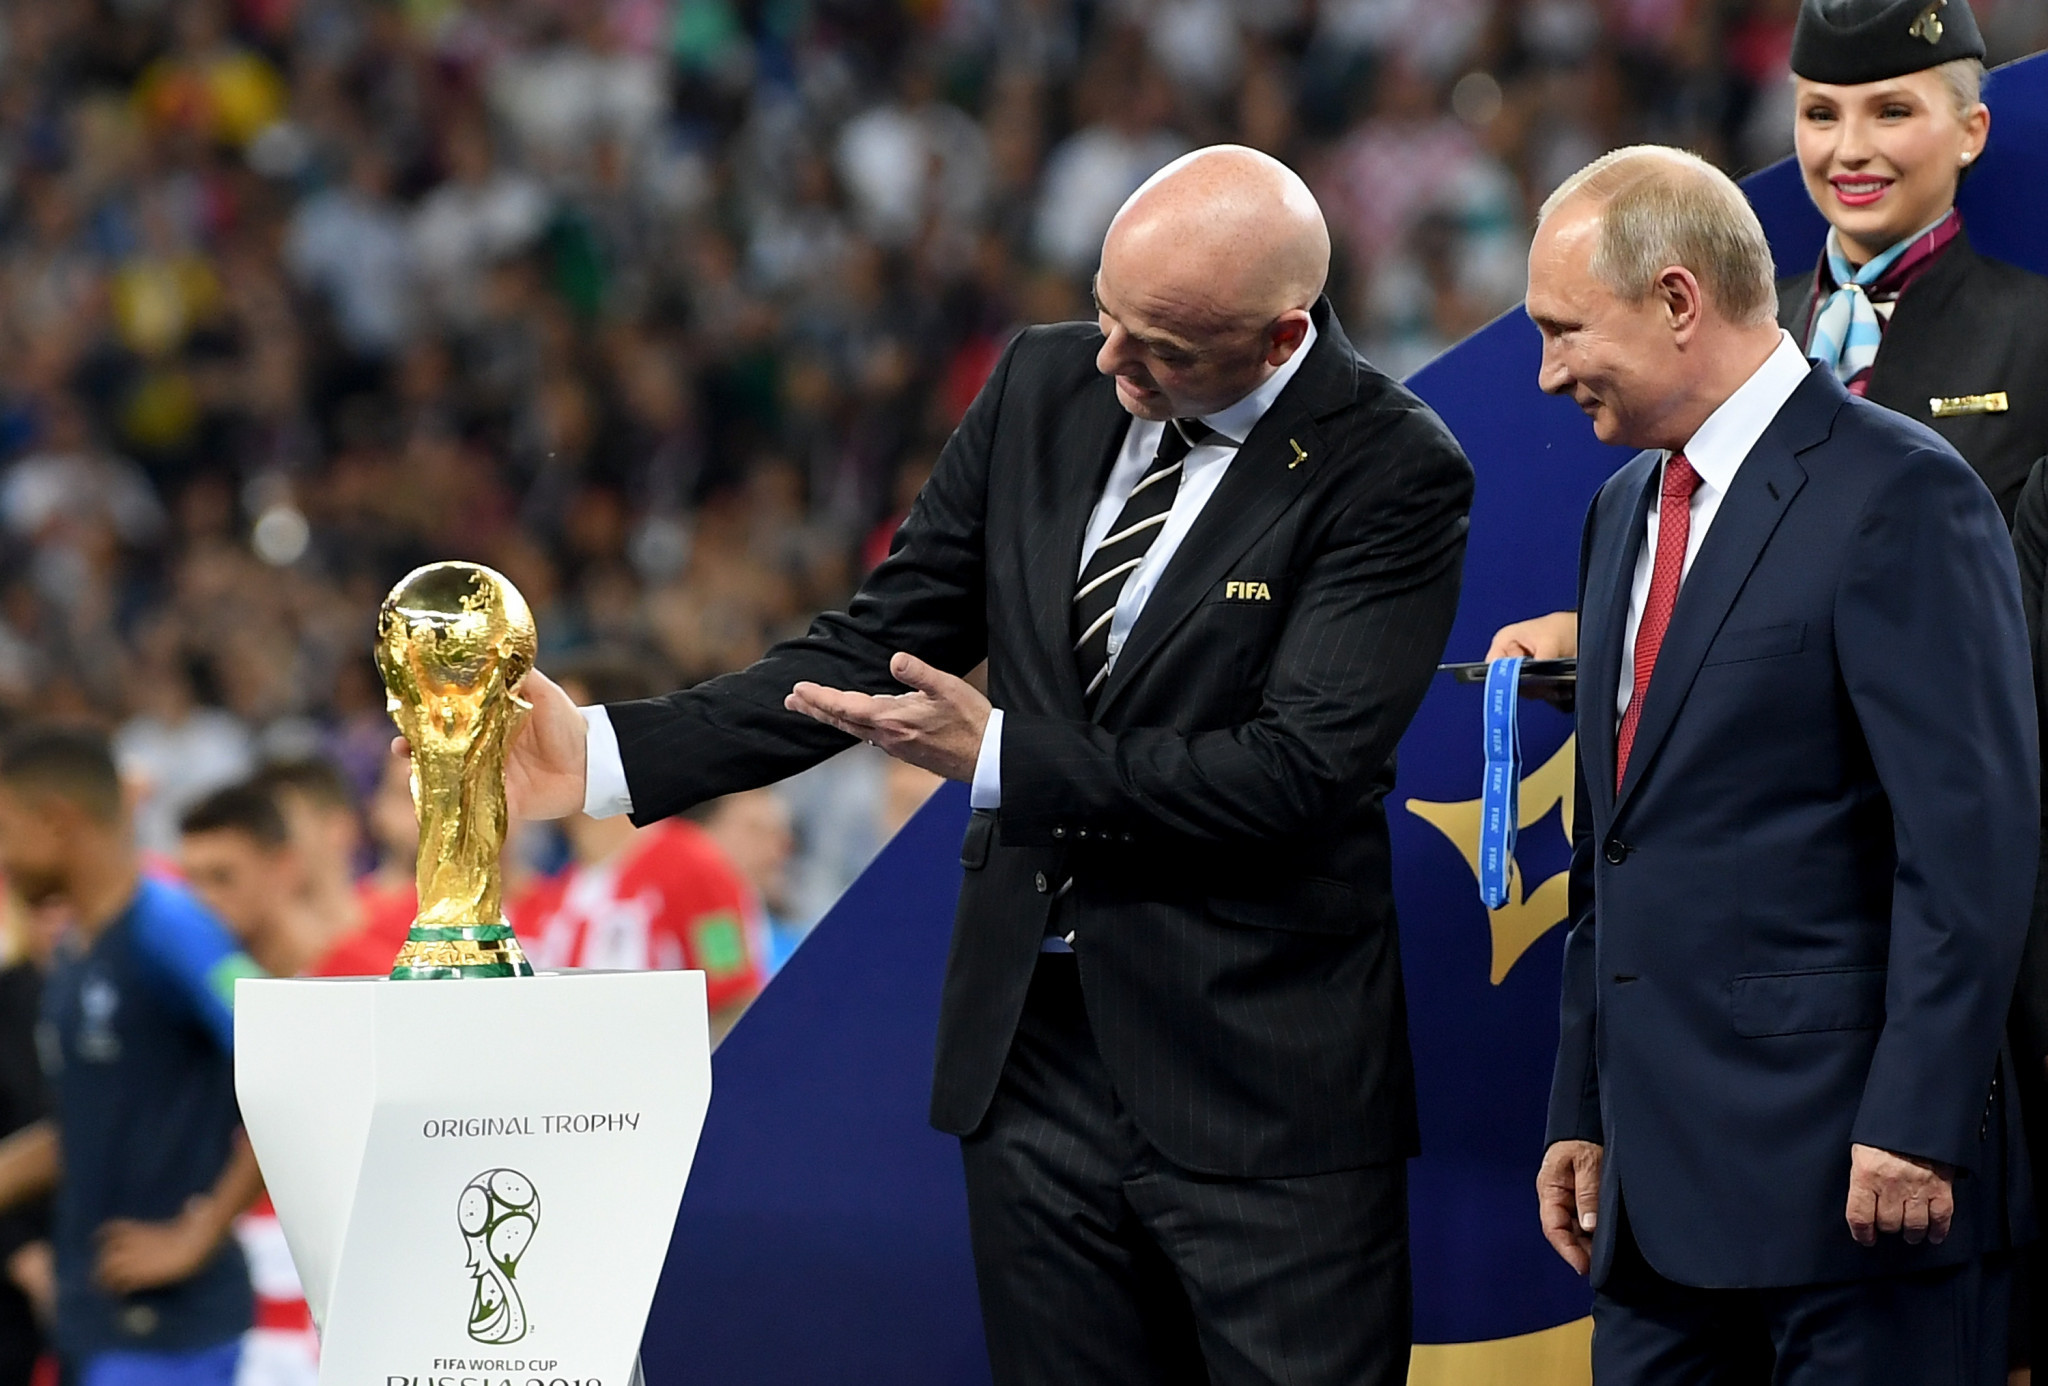 FIFA President Gianni Infantino, left, previously called the 2018 tournament "the best World Cup ever", but today admitted it "did not create a lasting peace" ©Getty Images